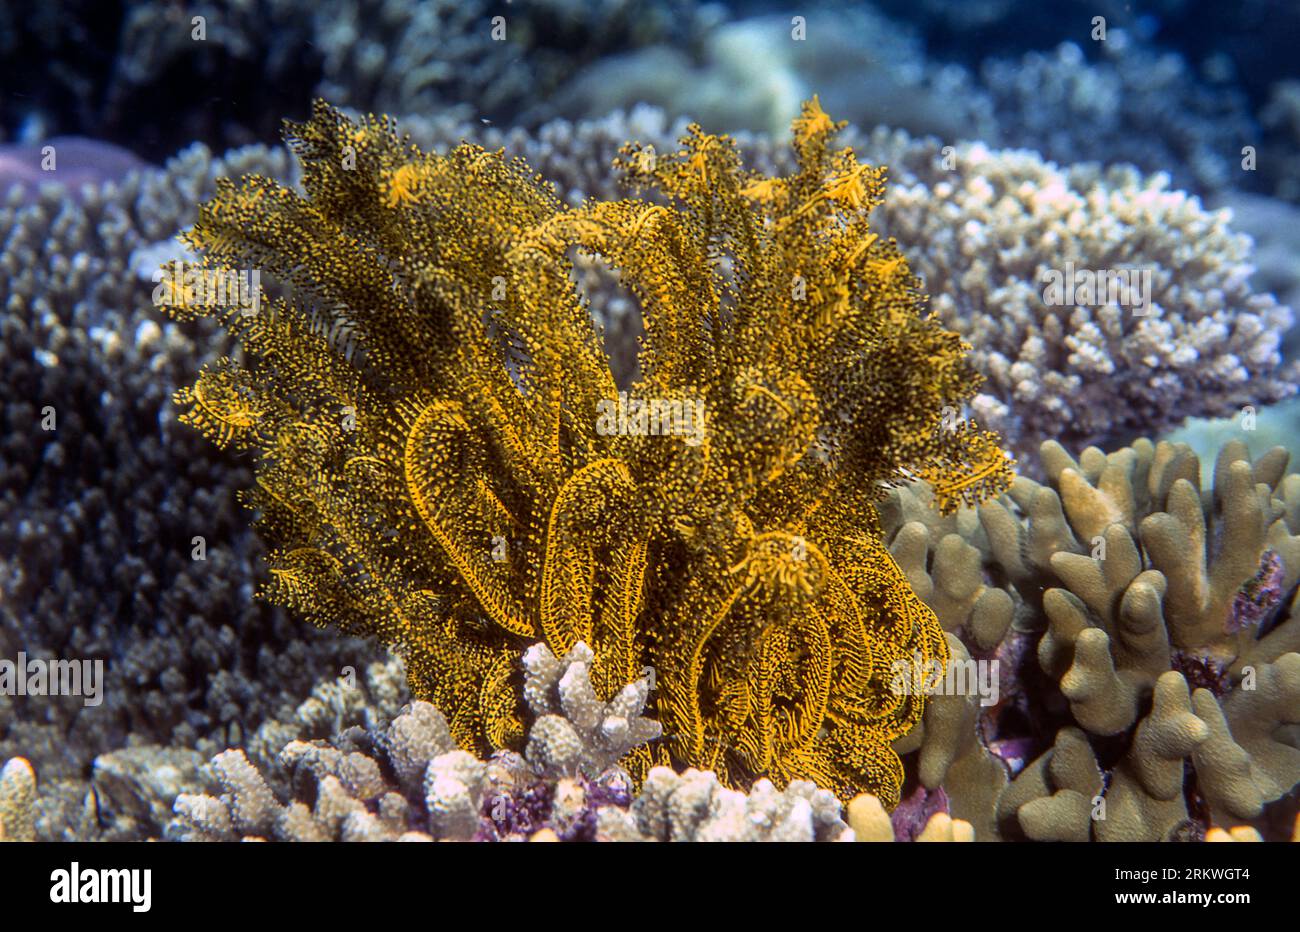 Noble feather star (Comaster nobilis) from Bunaken NP, North Sulawesi, Indonesia. Stock Photo